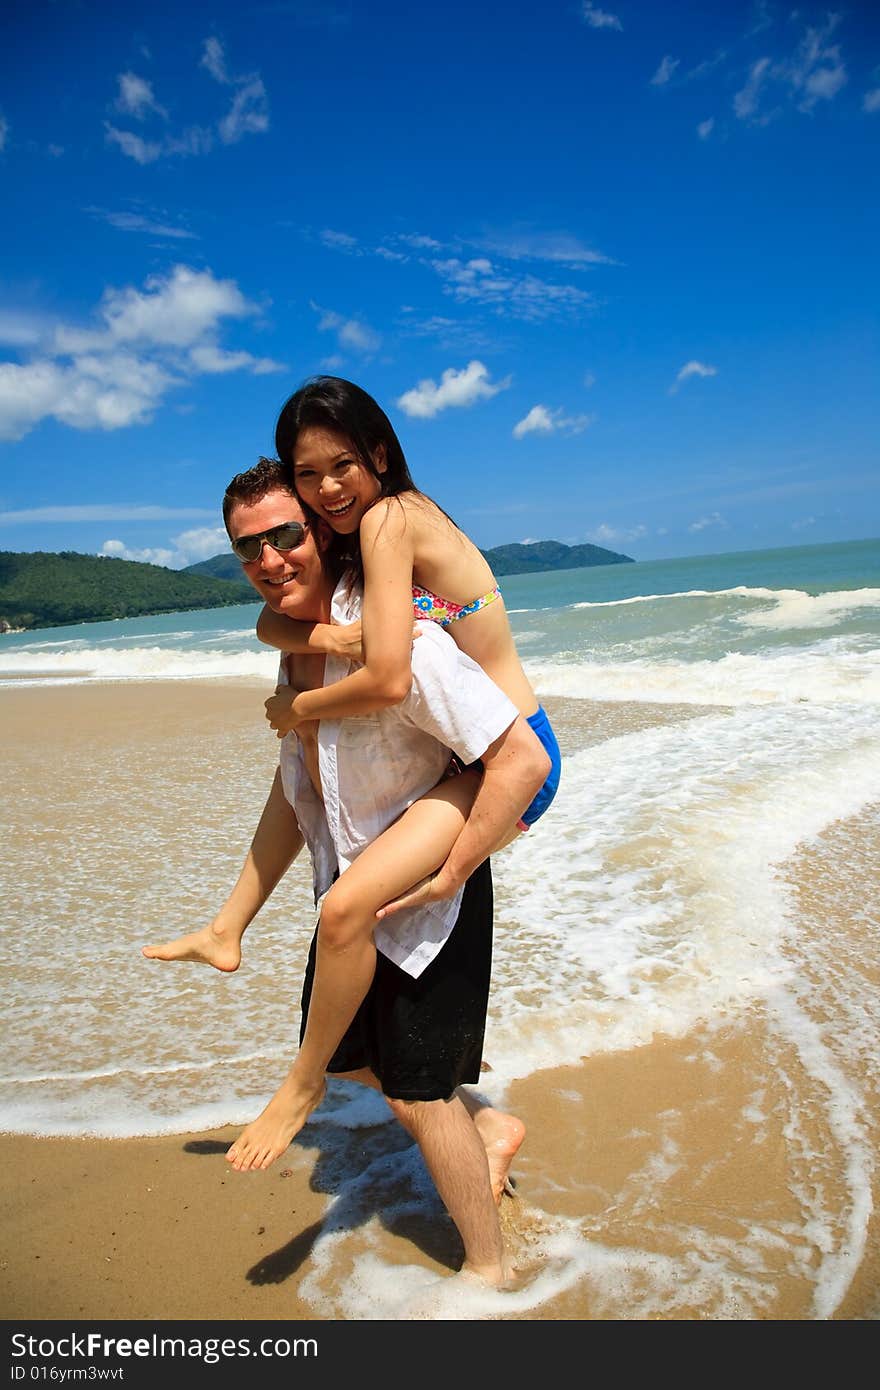 Portrait of a happy young couple having fun on the beach. Couple enjoying a summer vacation. Portrait of a happy young couple having fun on the beach. Couple enjoying a summer vacation.